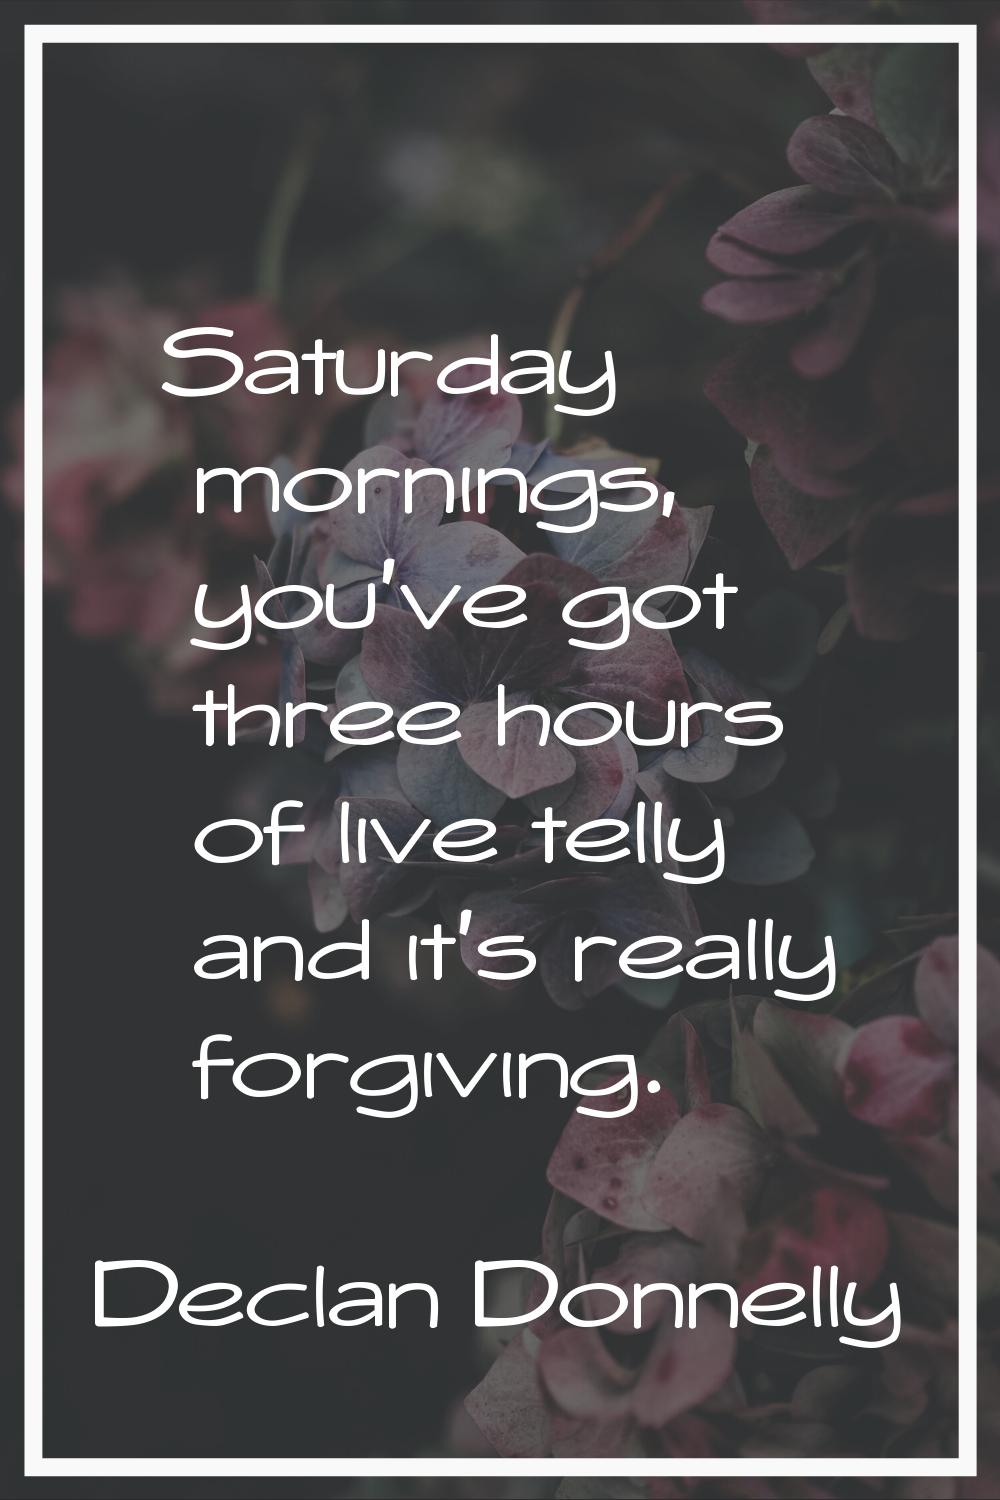 Saturday mornings, you've got three hours of live telly and it's really forgiving.